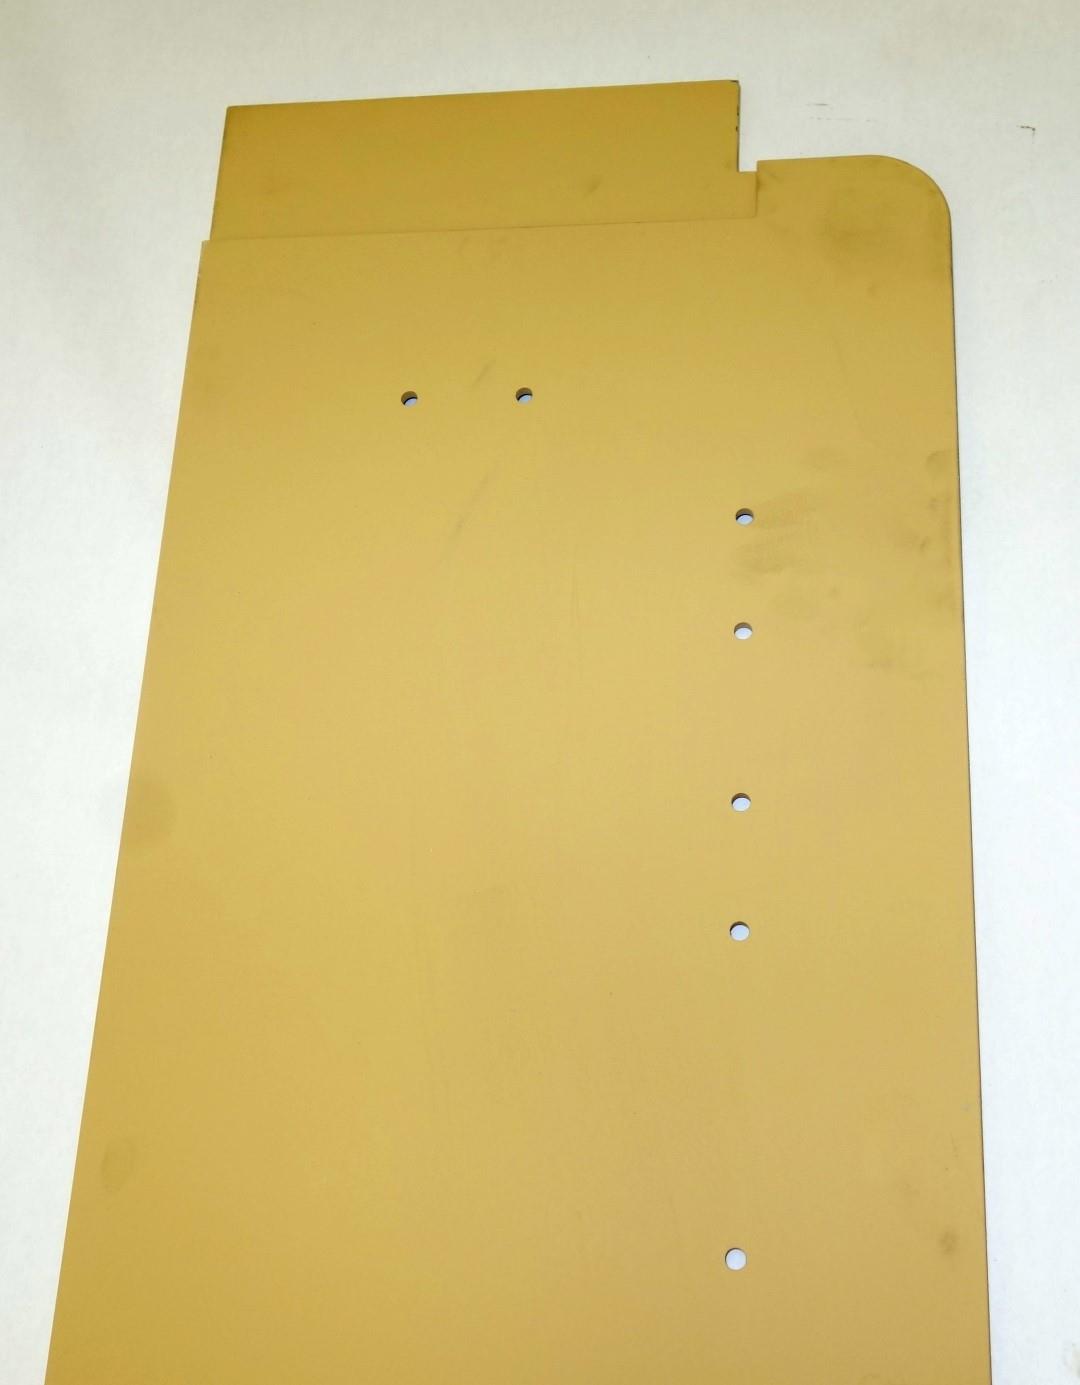 HM-738 | 2540-01-569-0669 Rear Armor Roof Plate for HMMWV Expanded Capacity Armament Carrier NOS (5).JPG